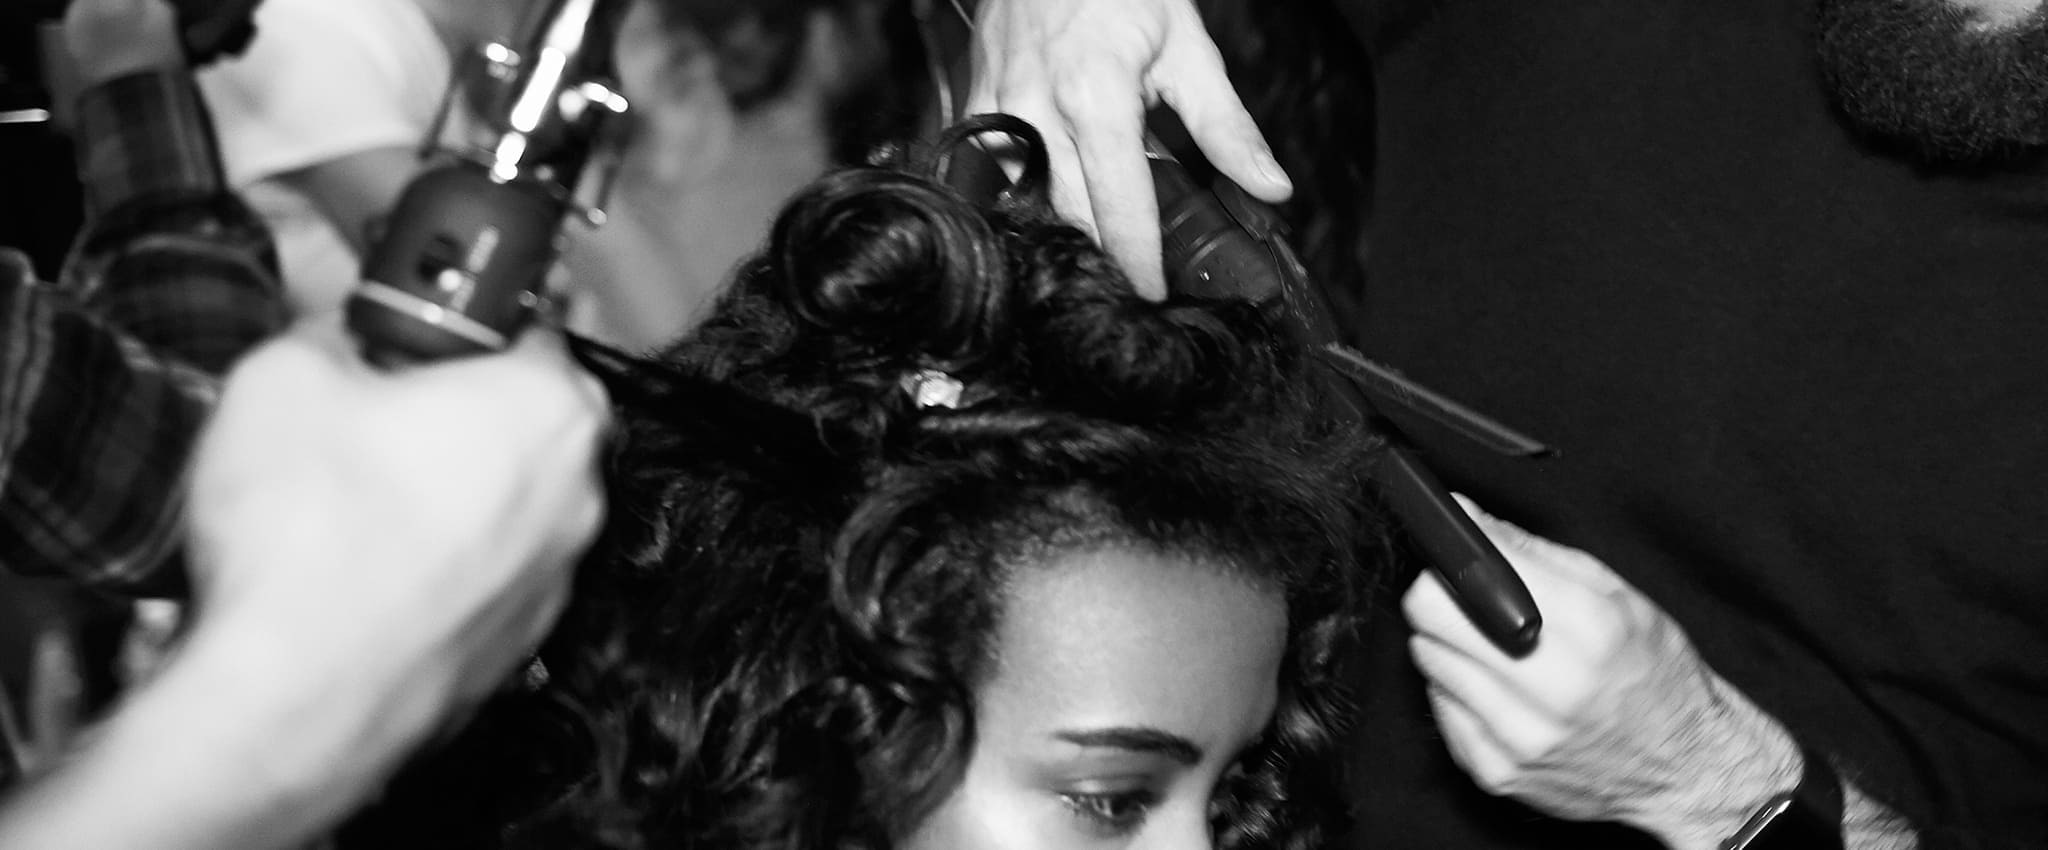 A model has her curly hair worked on by two stylists using heat tongs and other styling tools.